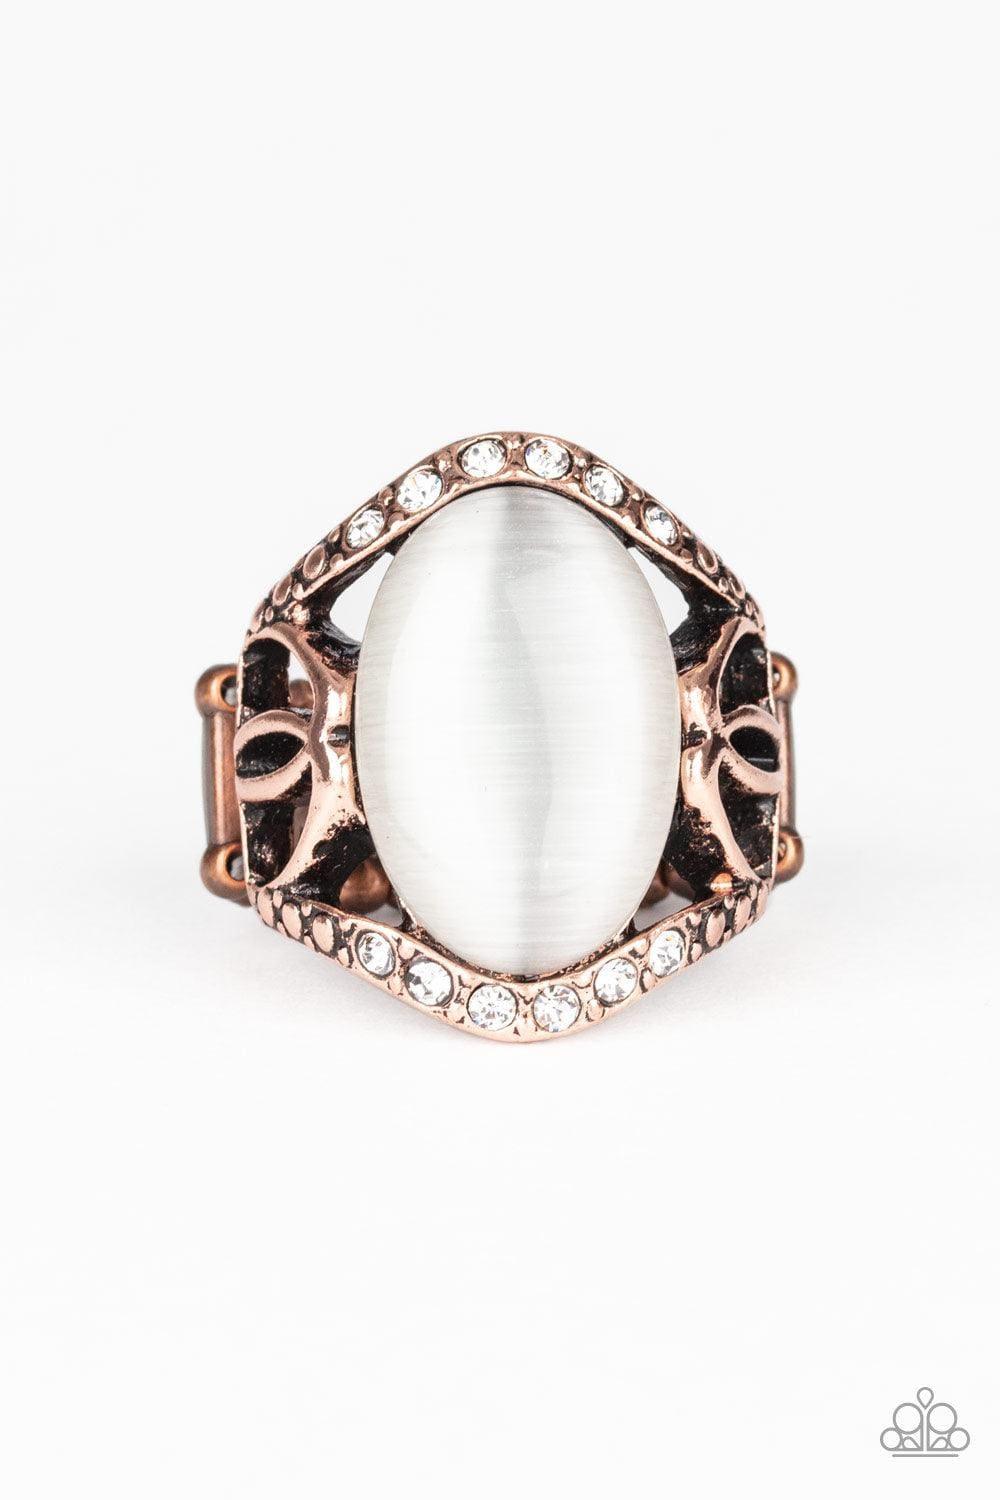 Paparazzi Accessories - Dew Onto Others - Copper Ring - Bling by JessieK